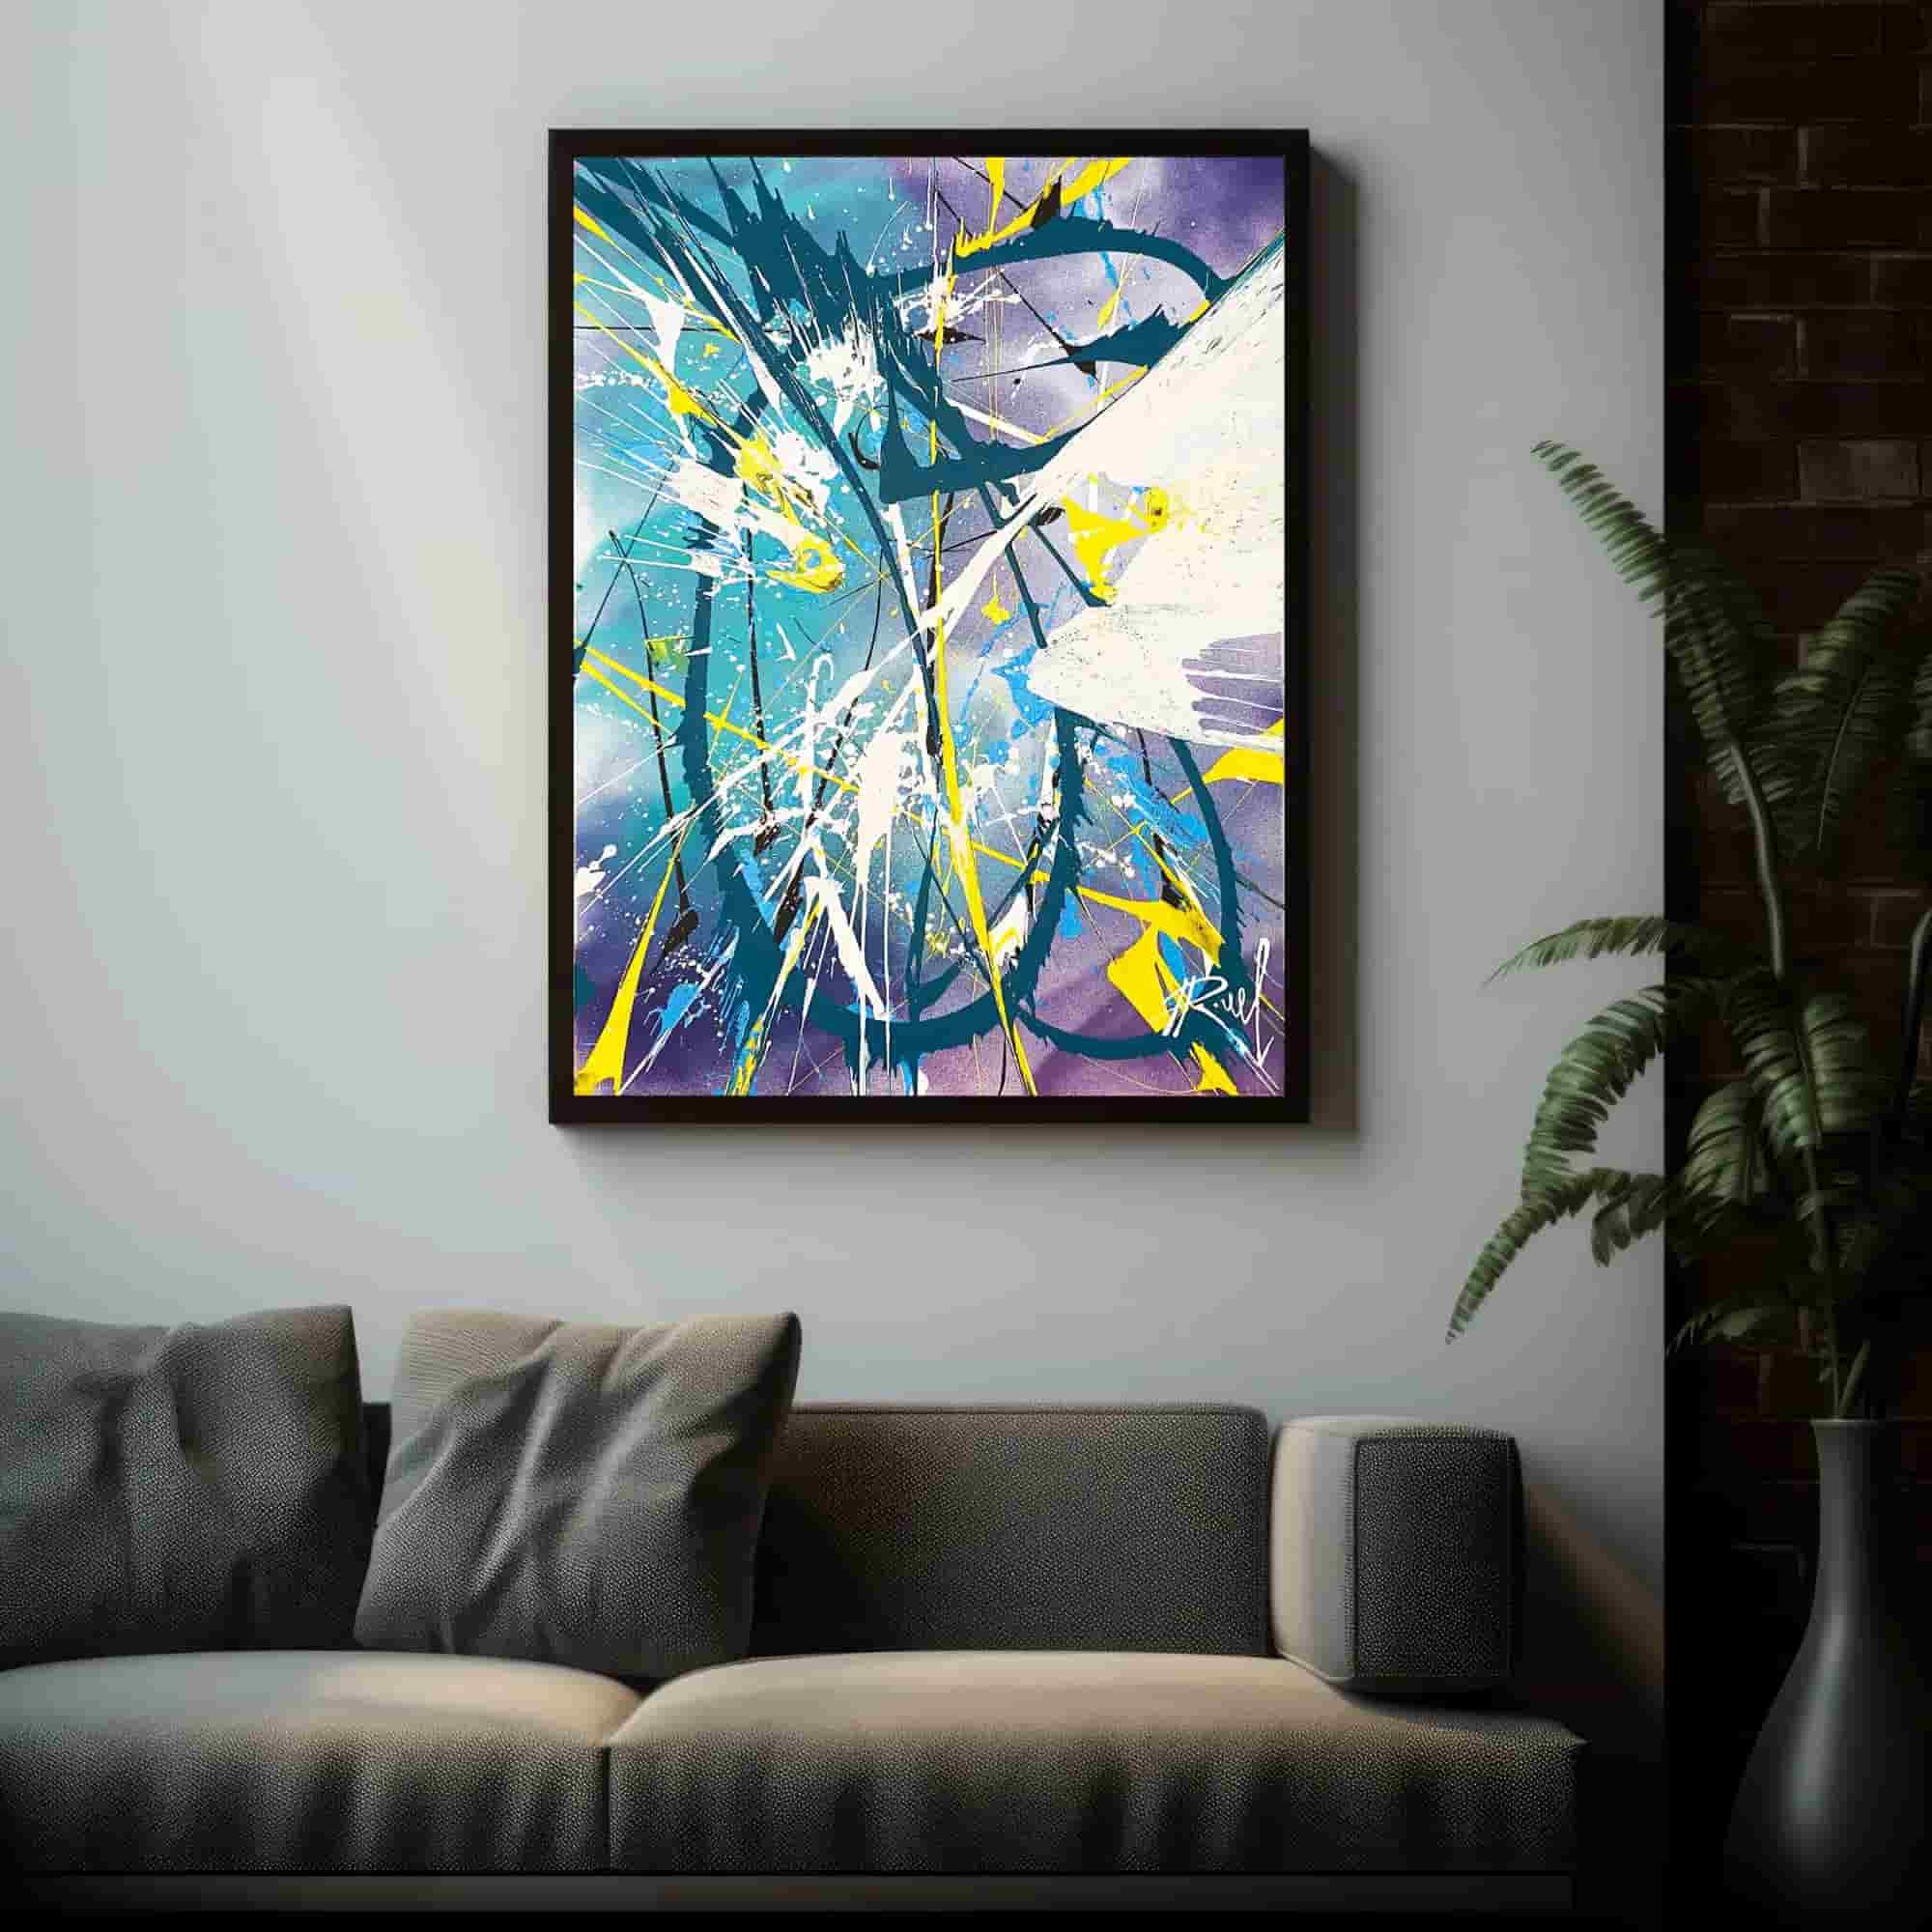 Spin art canvas painting's day exhibit, a fusion of acrylic paints and contemporary artistry, redefining living room ambiance.